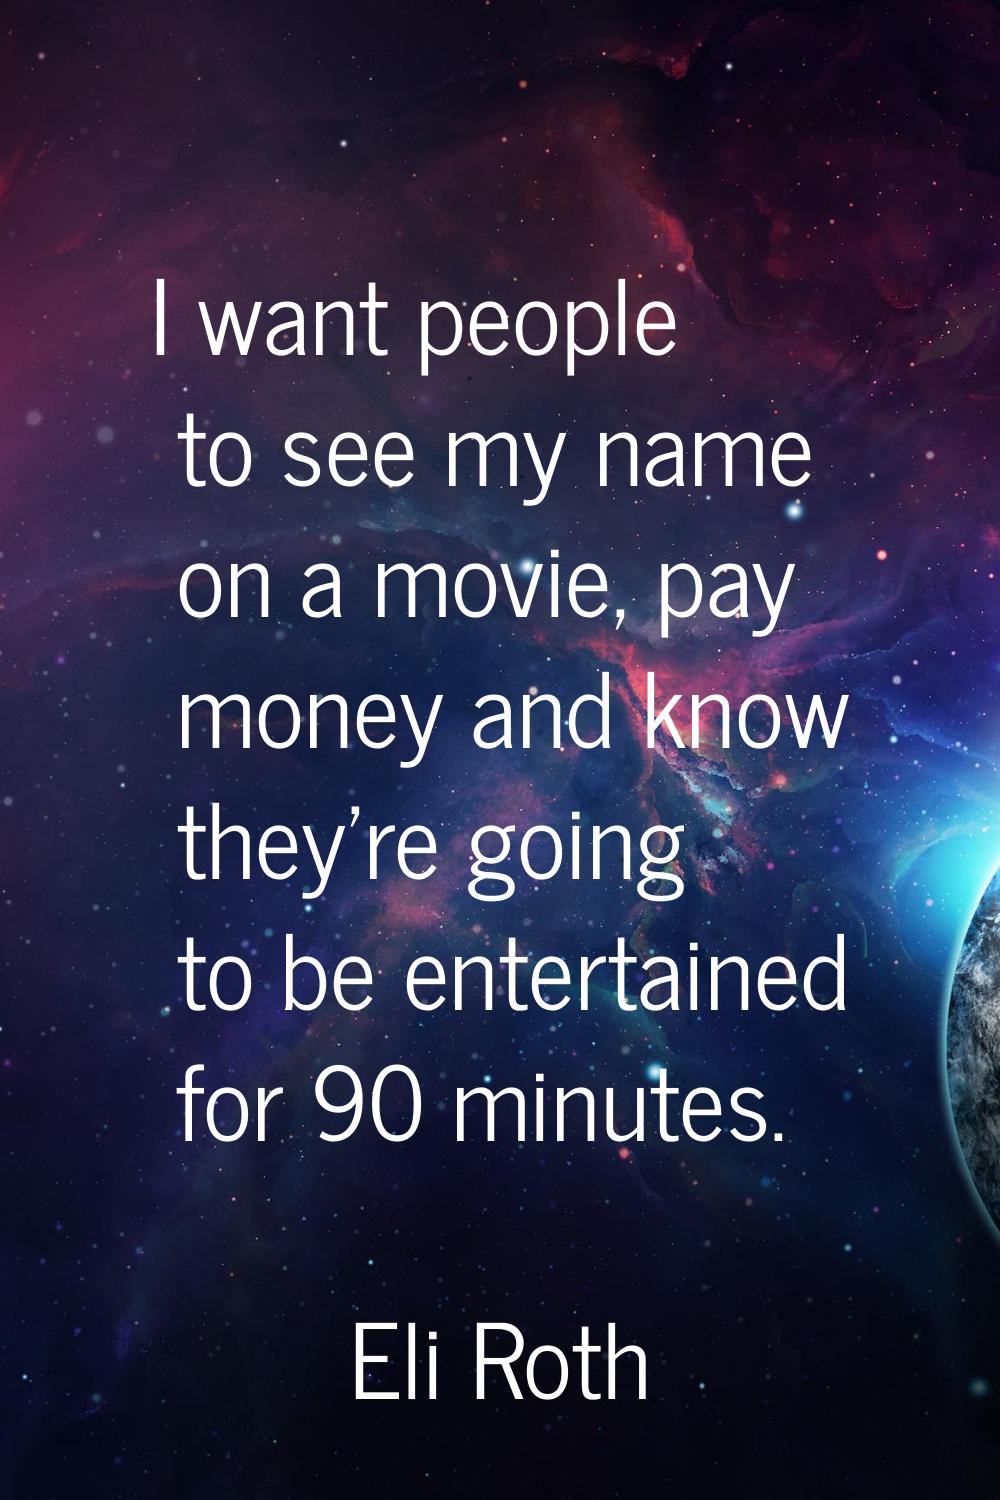 I want people to see my name on a movie, pay money and know they're going to be entertained for 90 